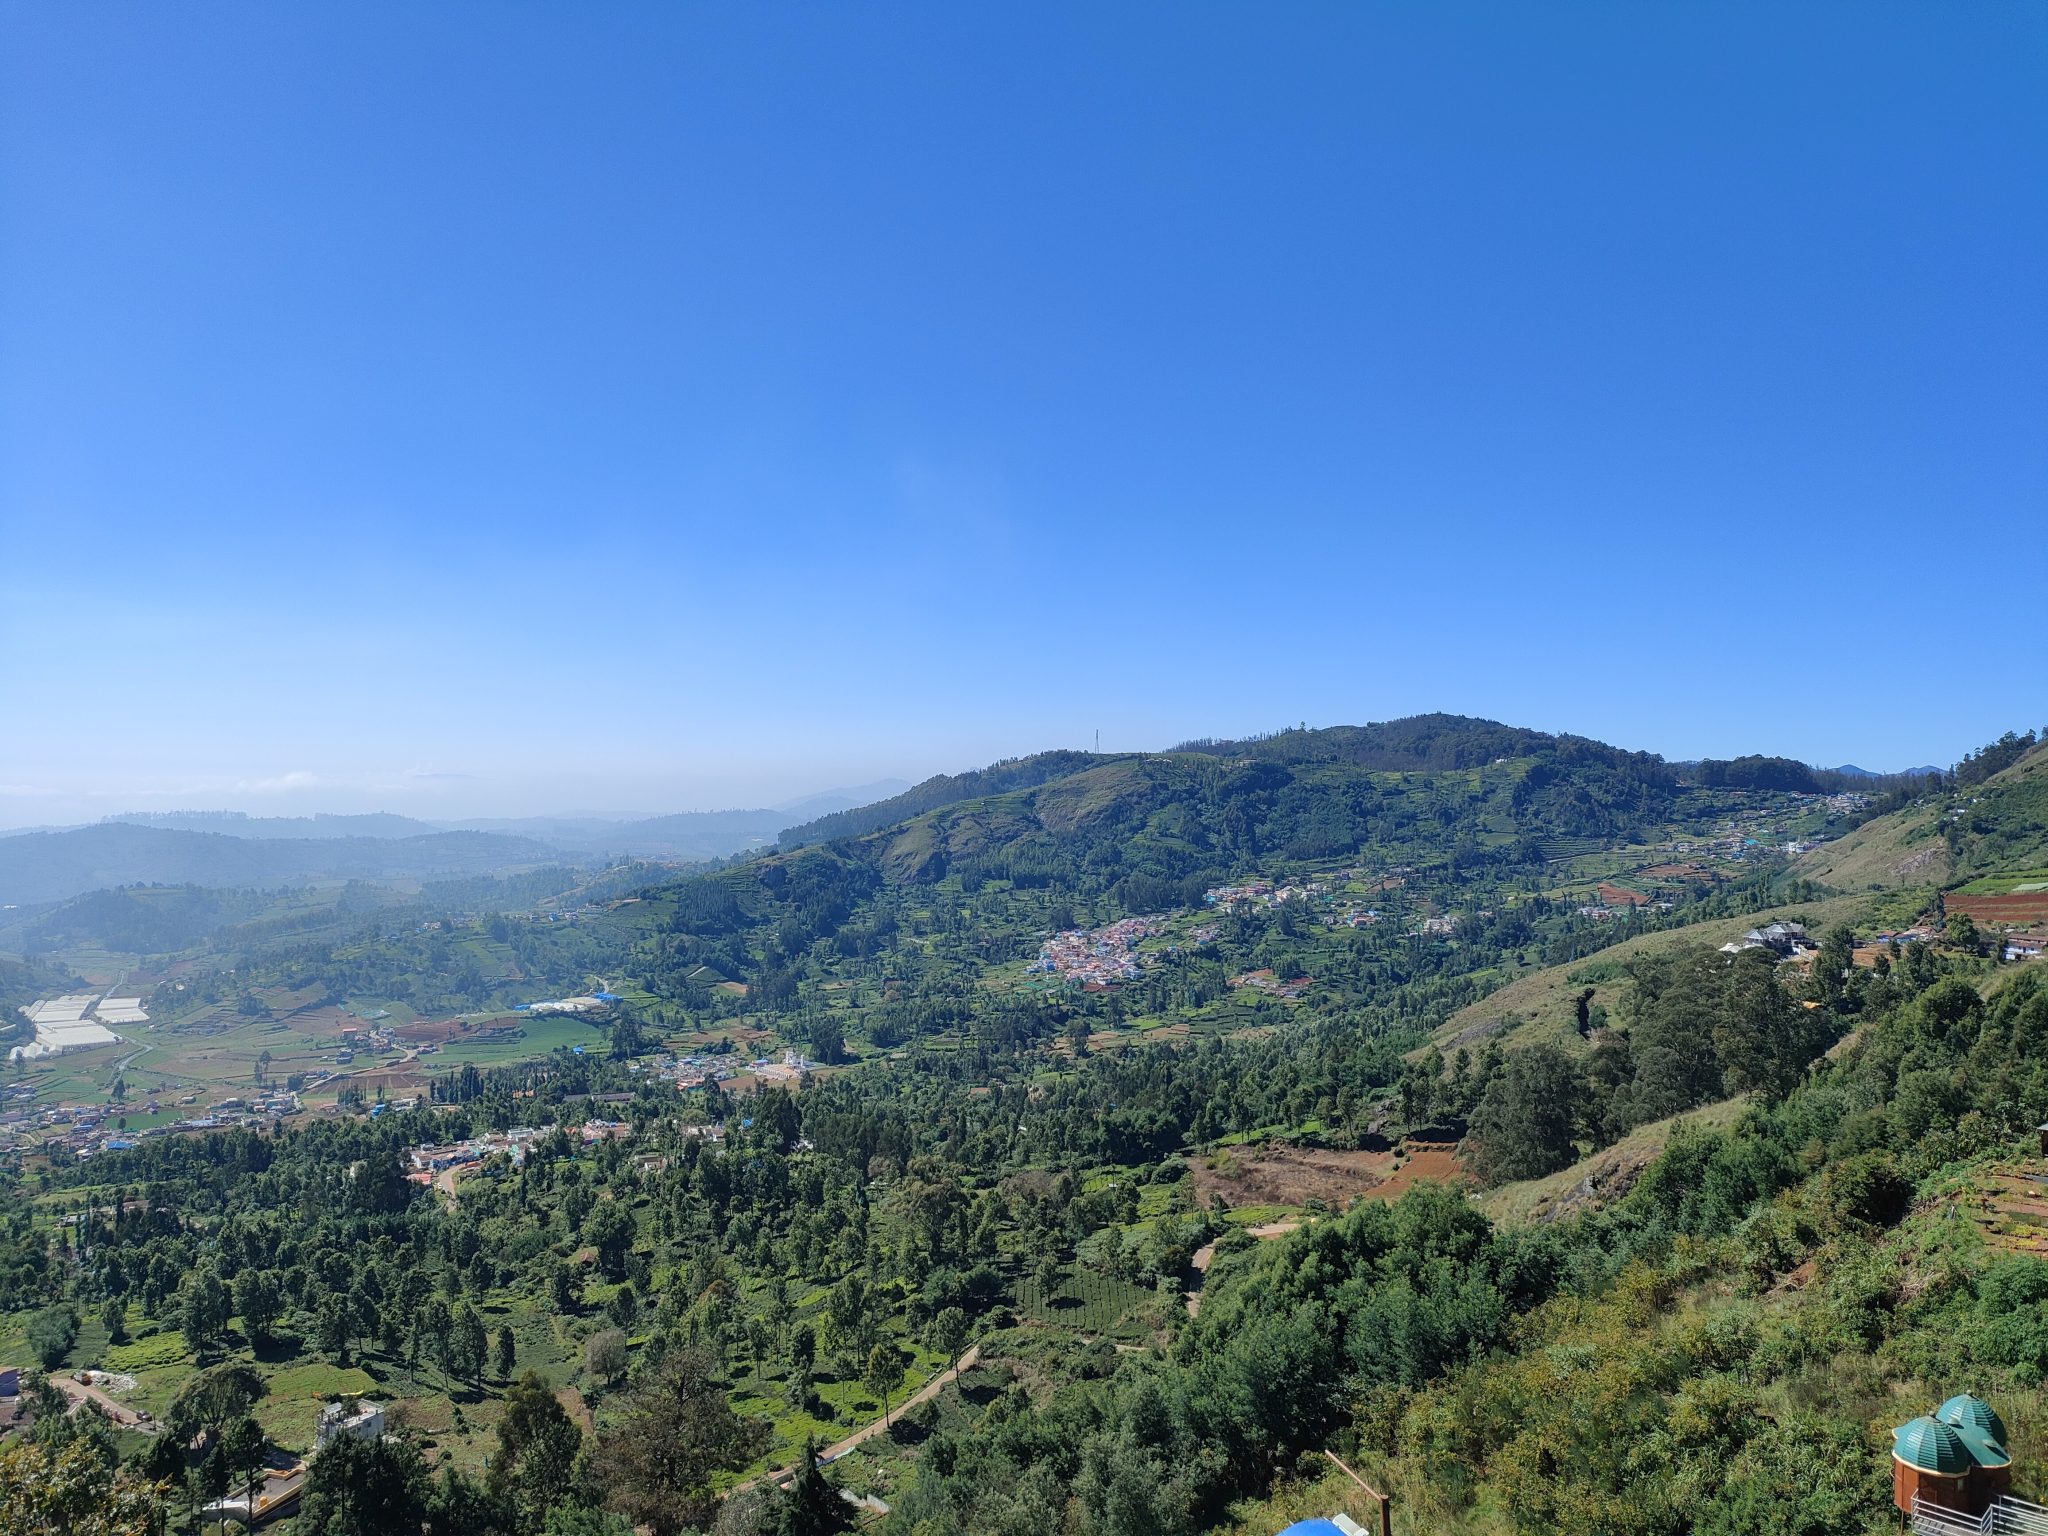 Scenery from Ooty, India